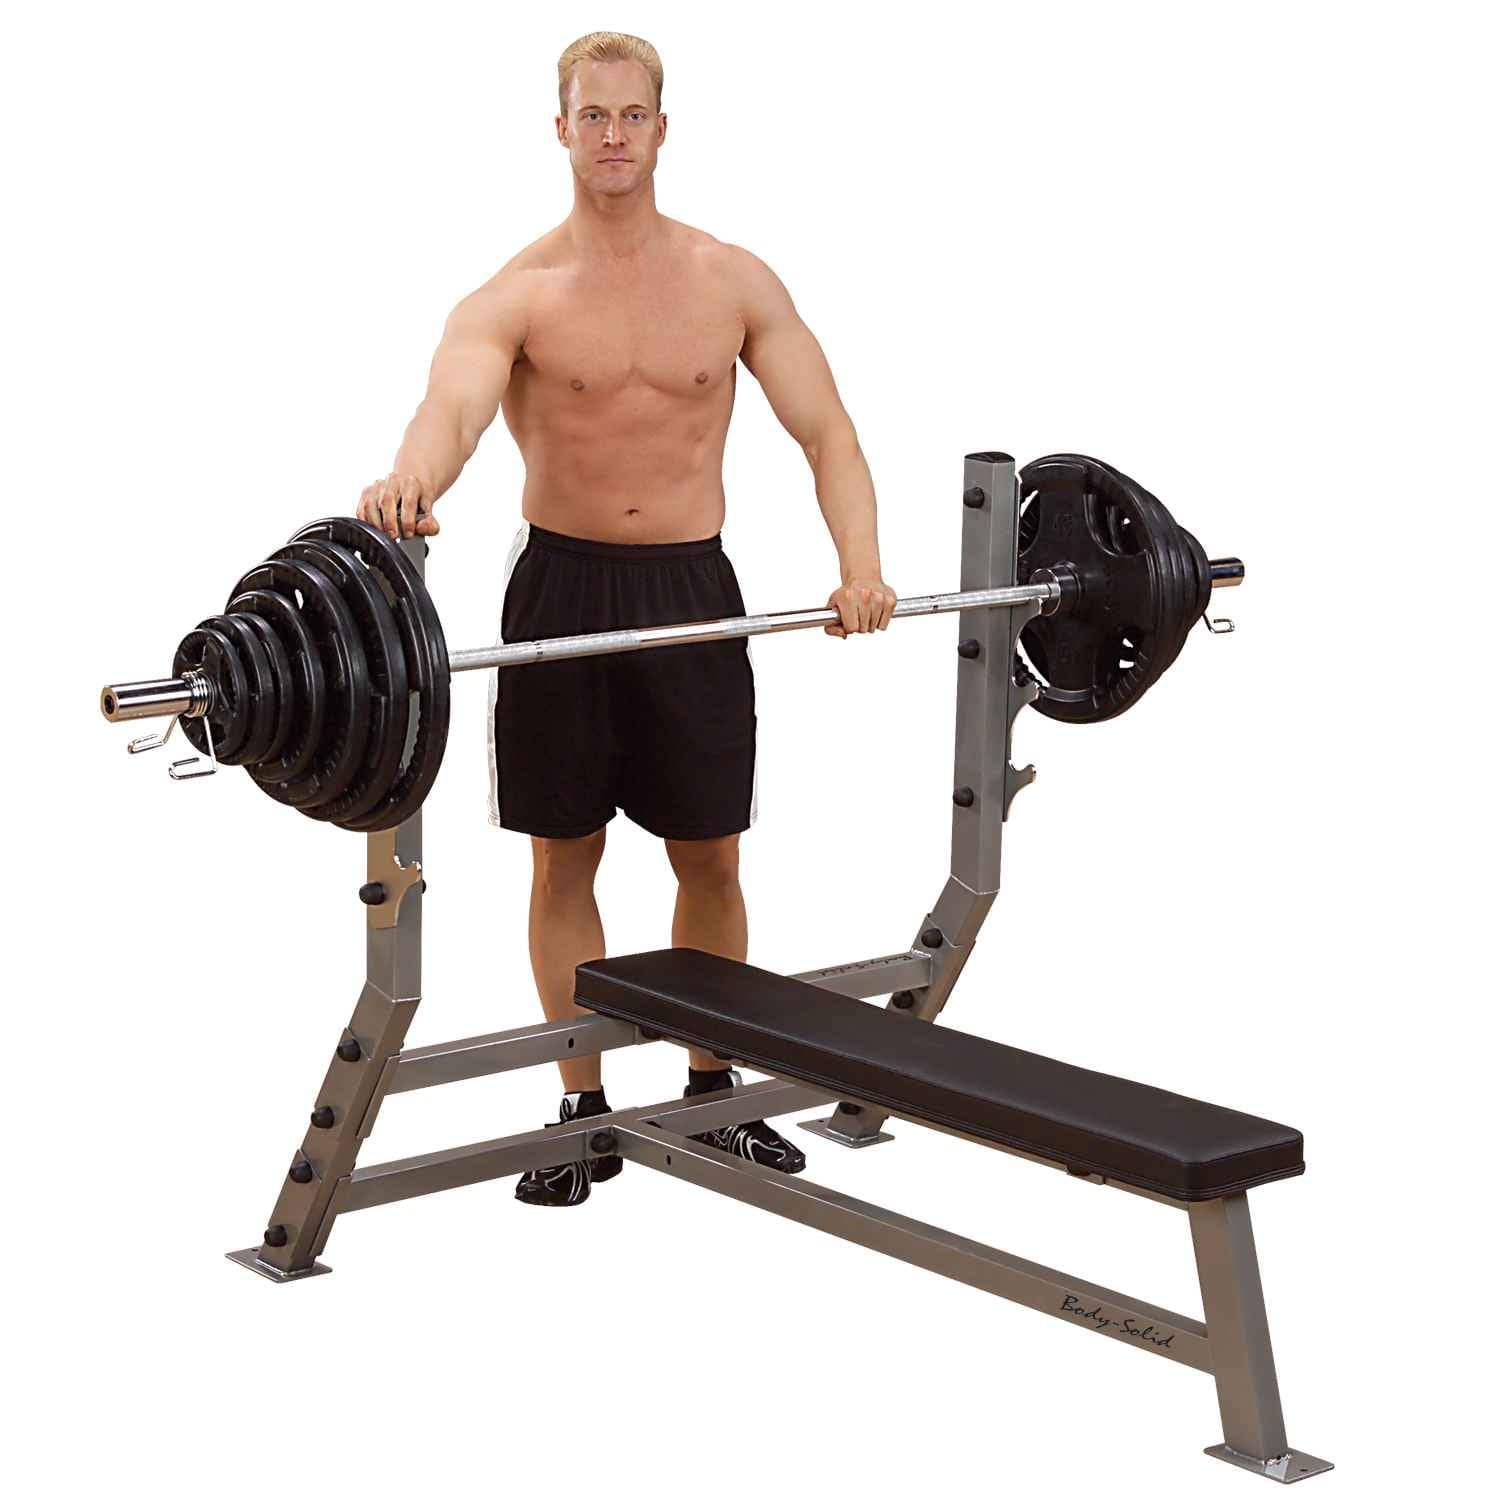 Body-Solid Flat Olympic Bench (SFB349G) bench Body-Solid 